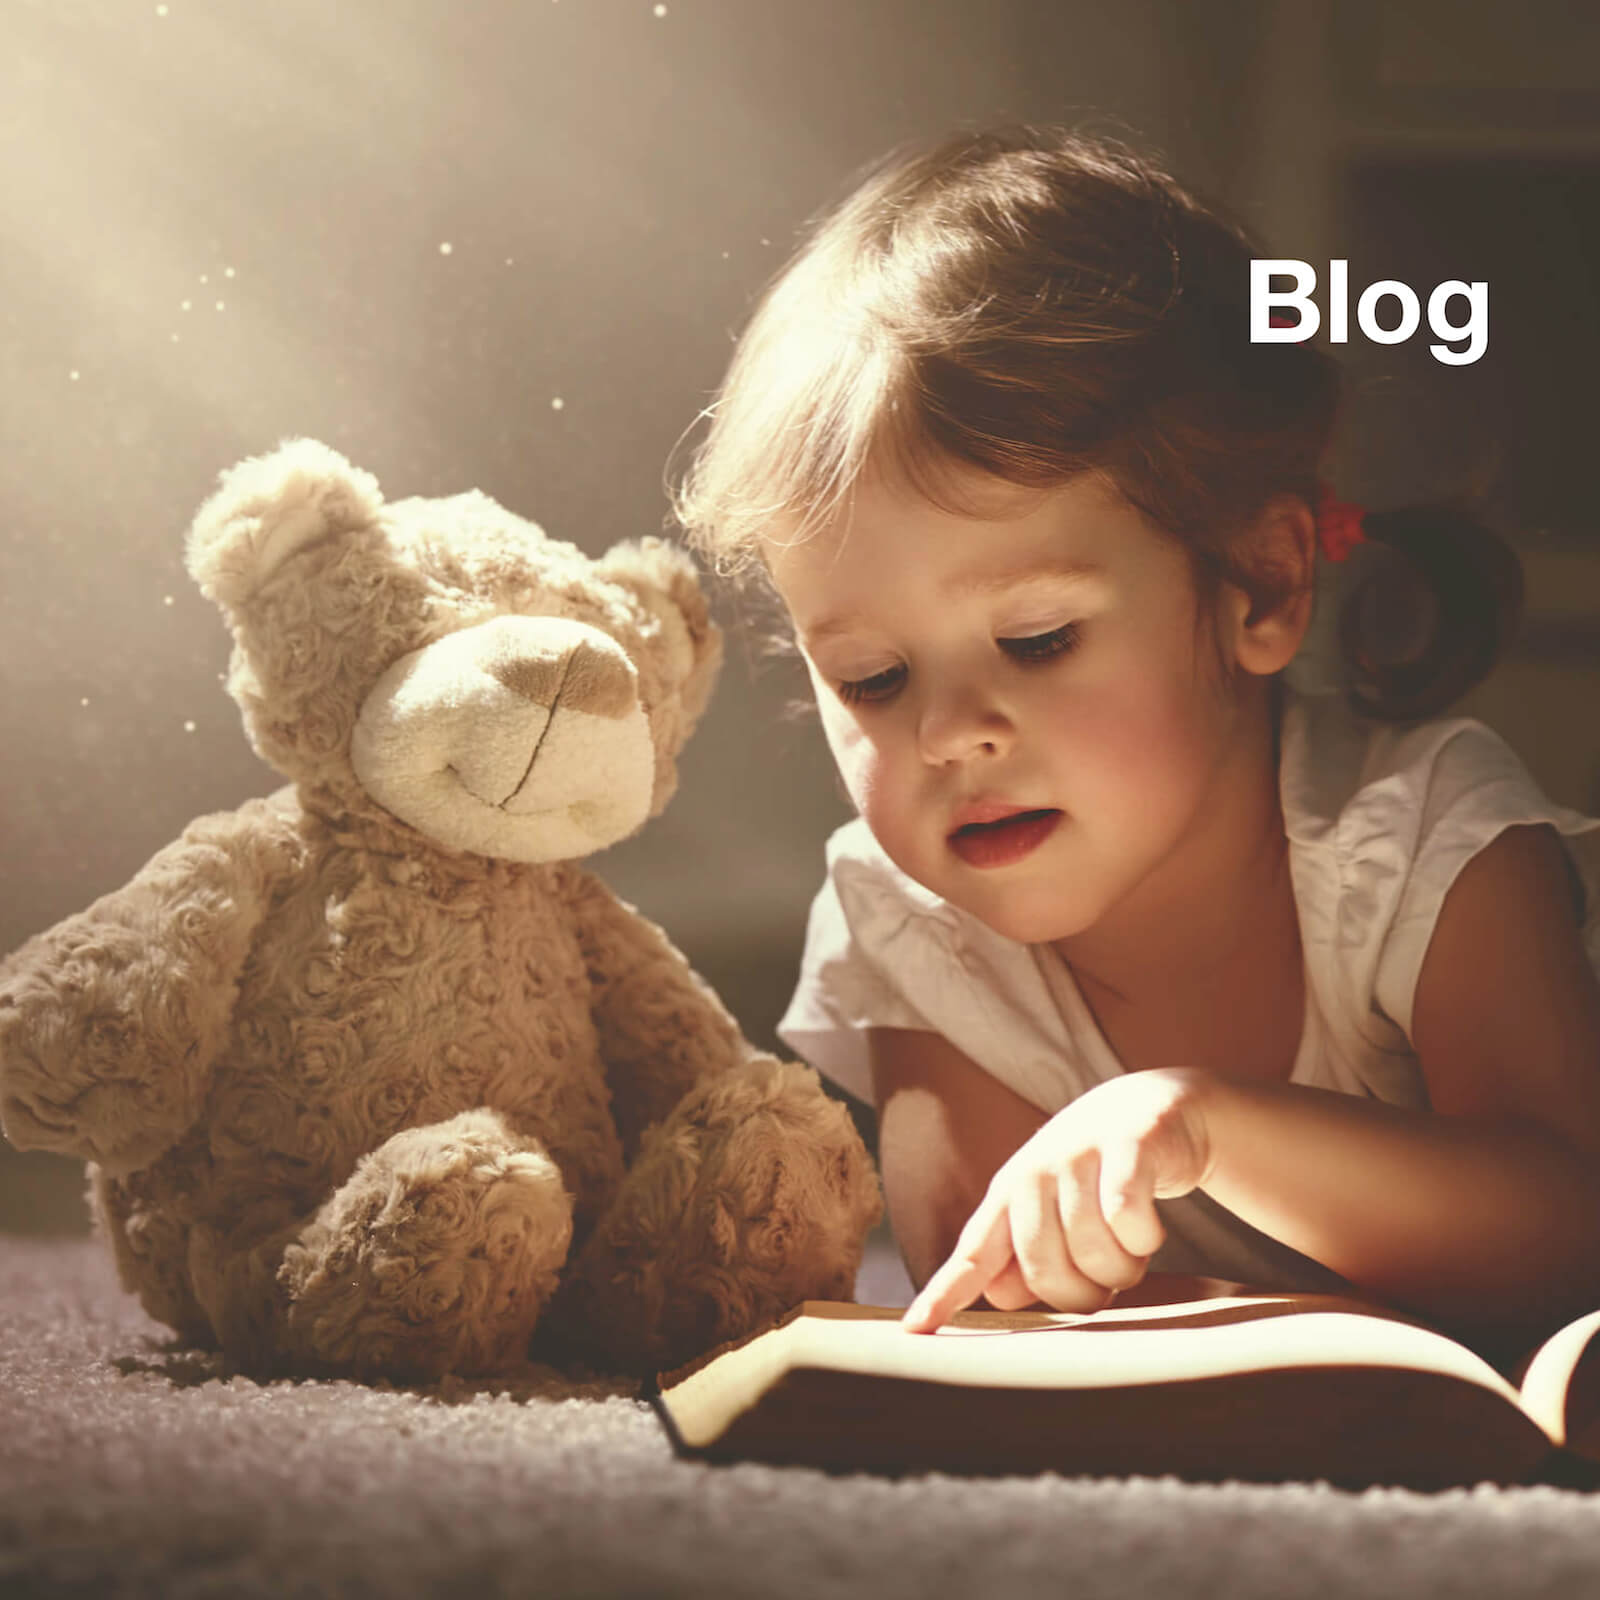 N4YK Blog for nannies and private staff with advice and tips for nannies, maternity nurses and other household staff.